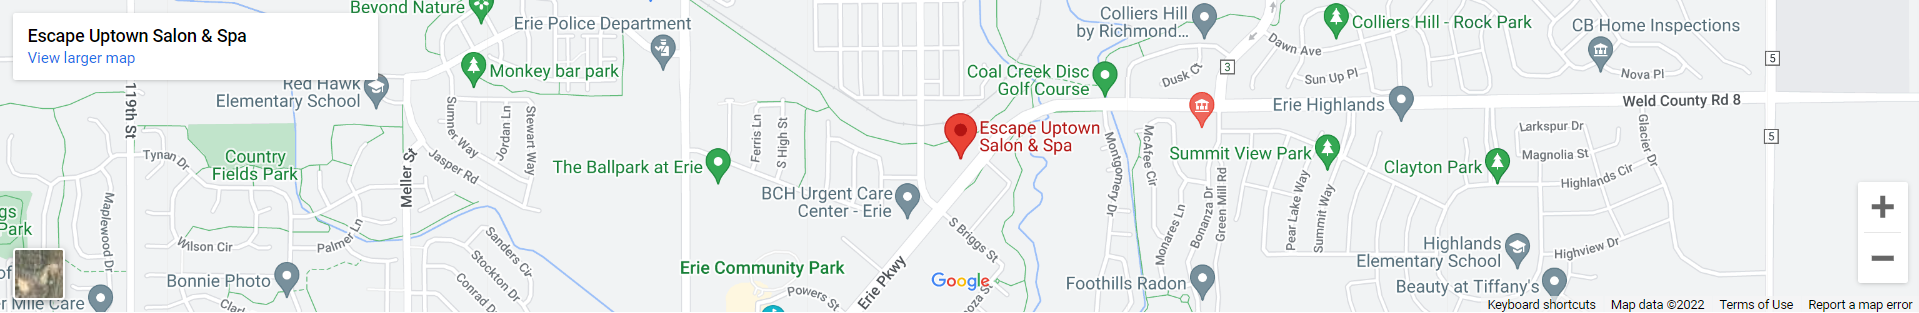 A map of the location of escape uptown salon & spa.